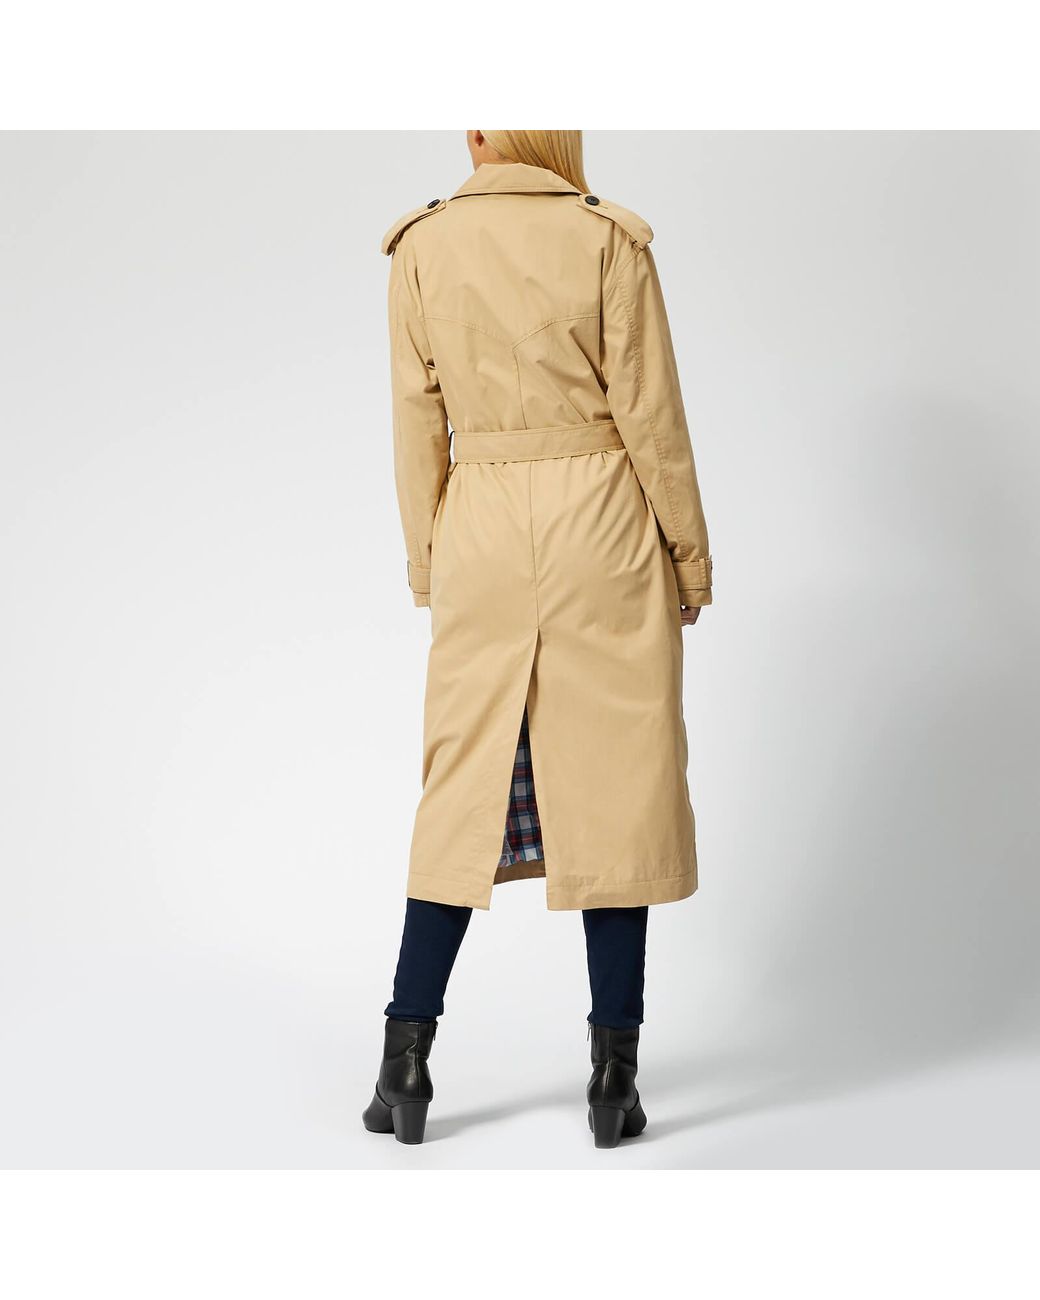 Levi's Kate Trench Coat in Natural | Lyst Australia